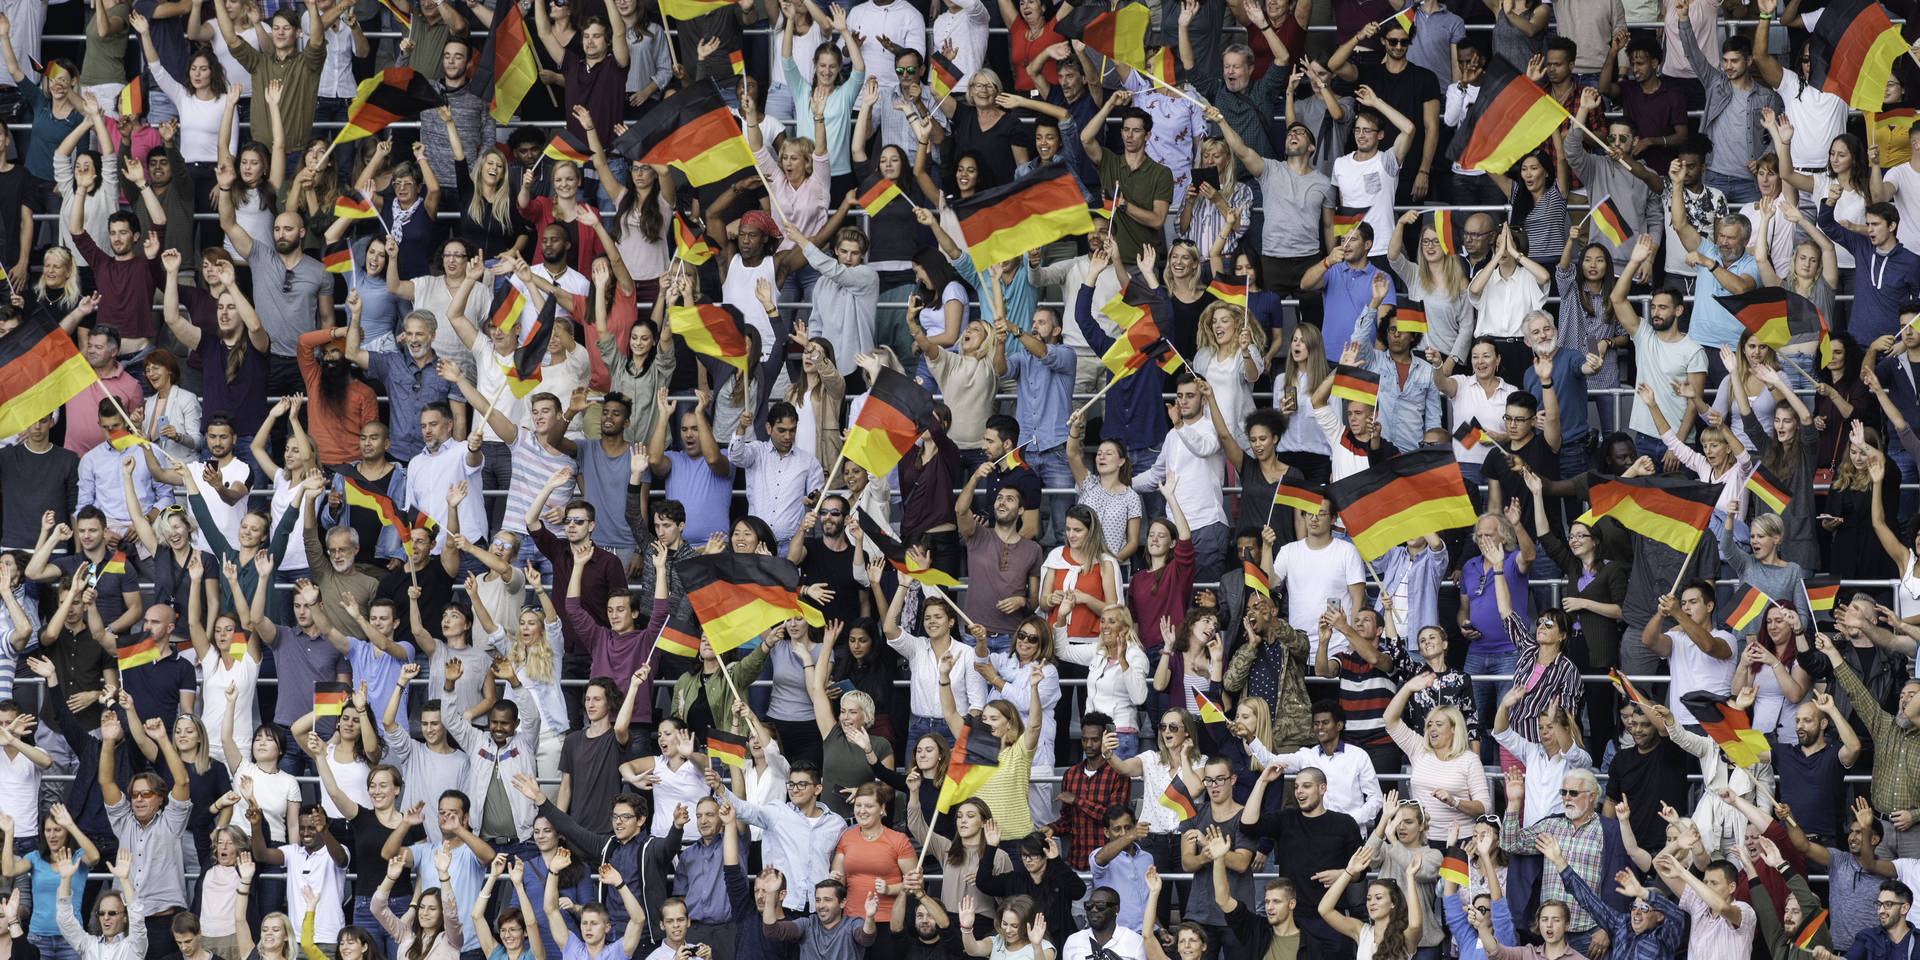 Germany supporters waving their flags on a stadium